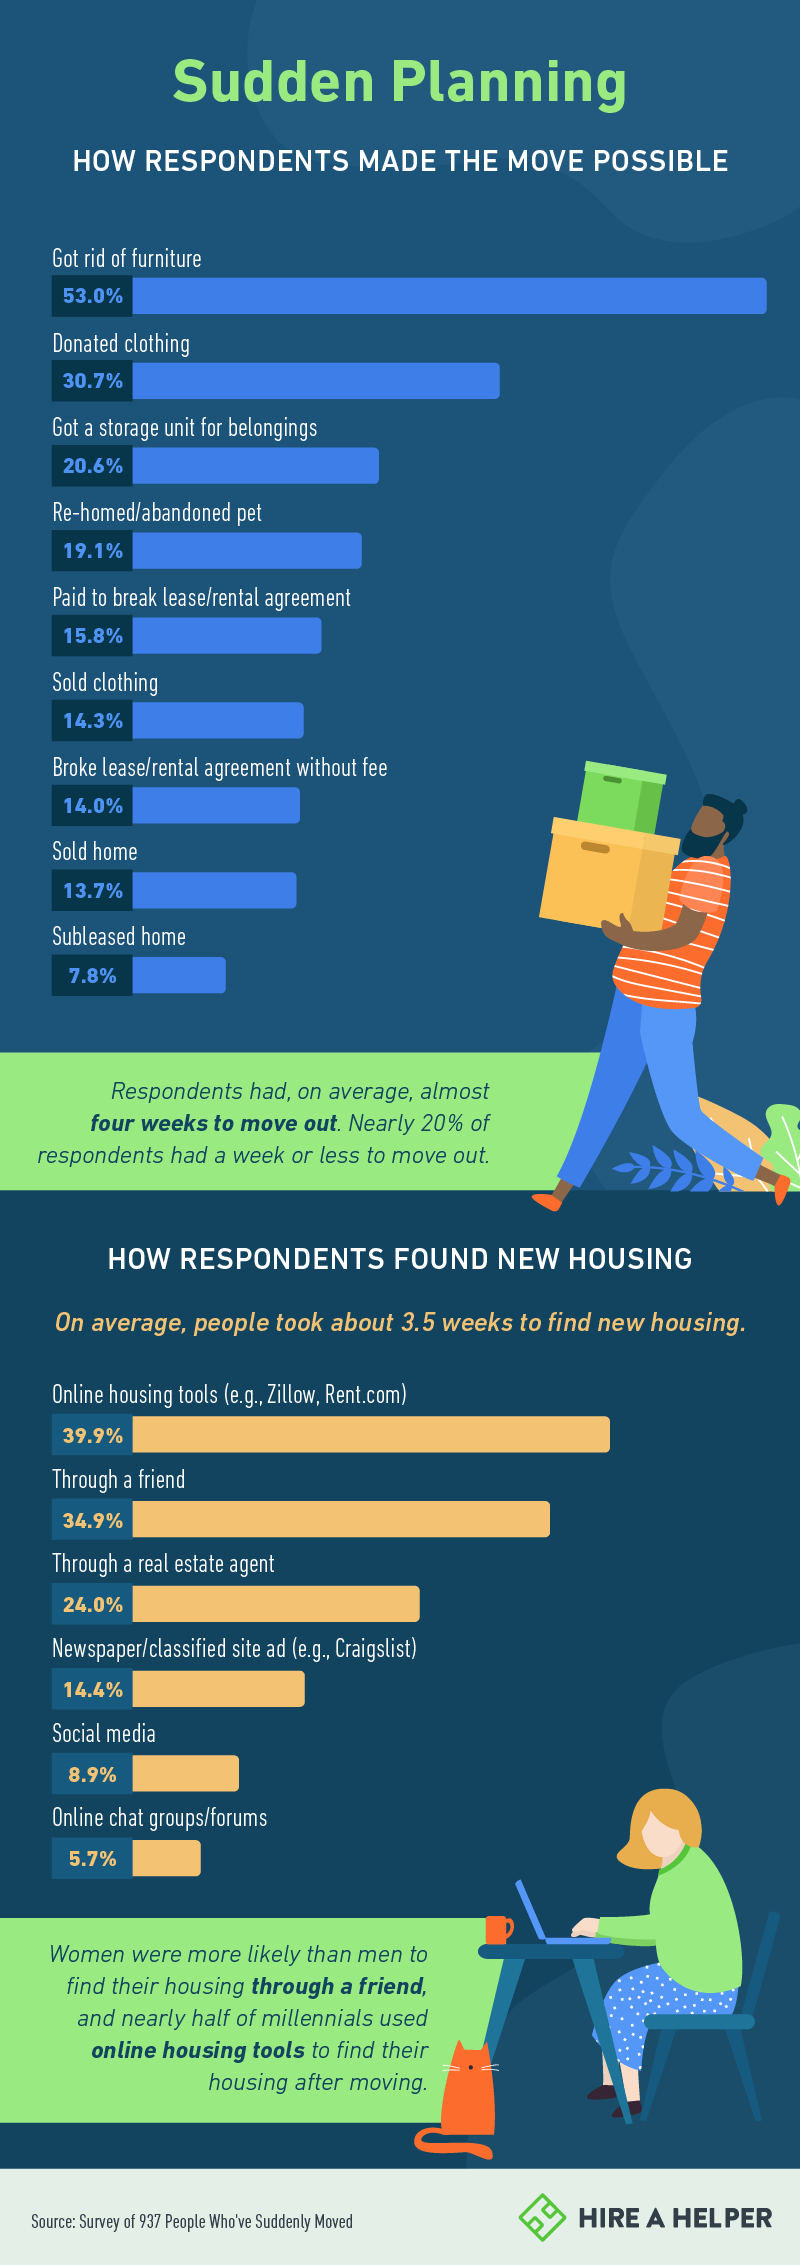 Sudden Planning, how respondents made the move possible